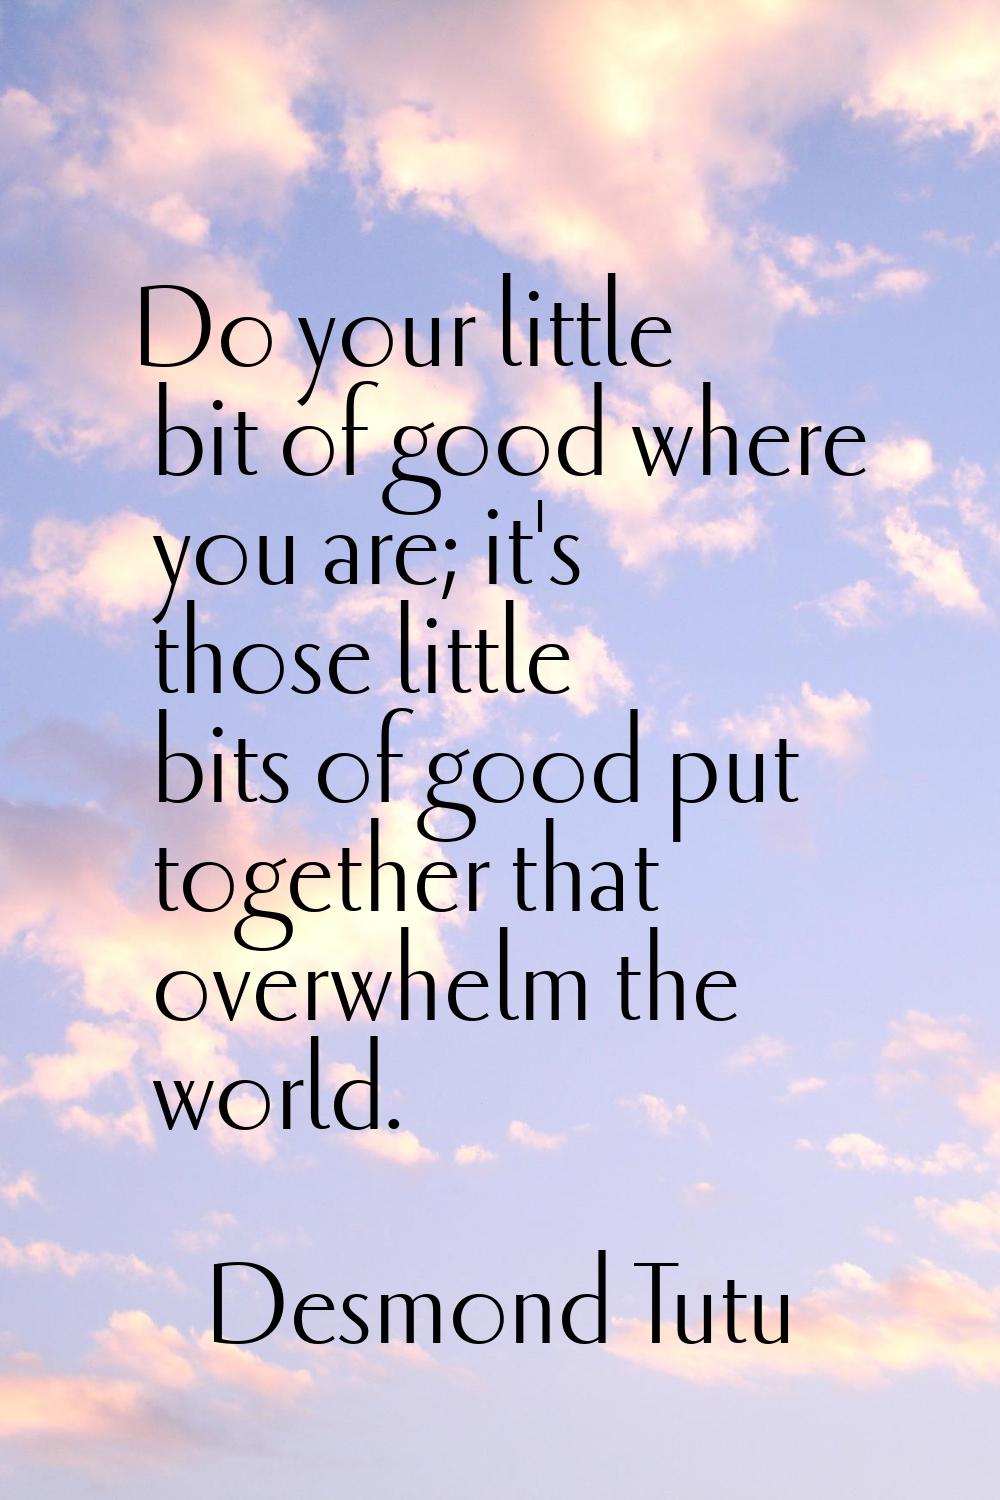 Do your little bit of good where you are; it's those little bits of good put together that overwhel